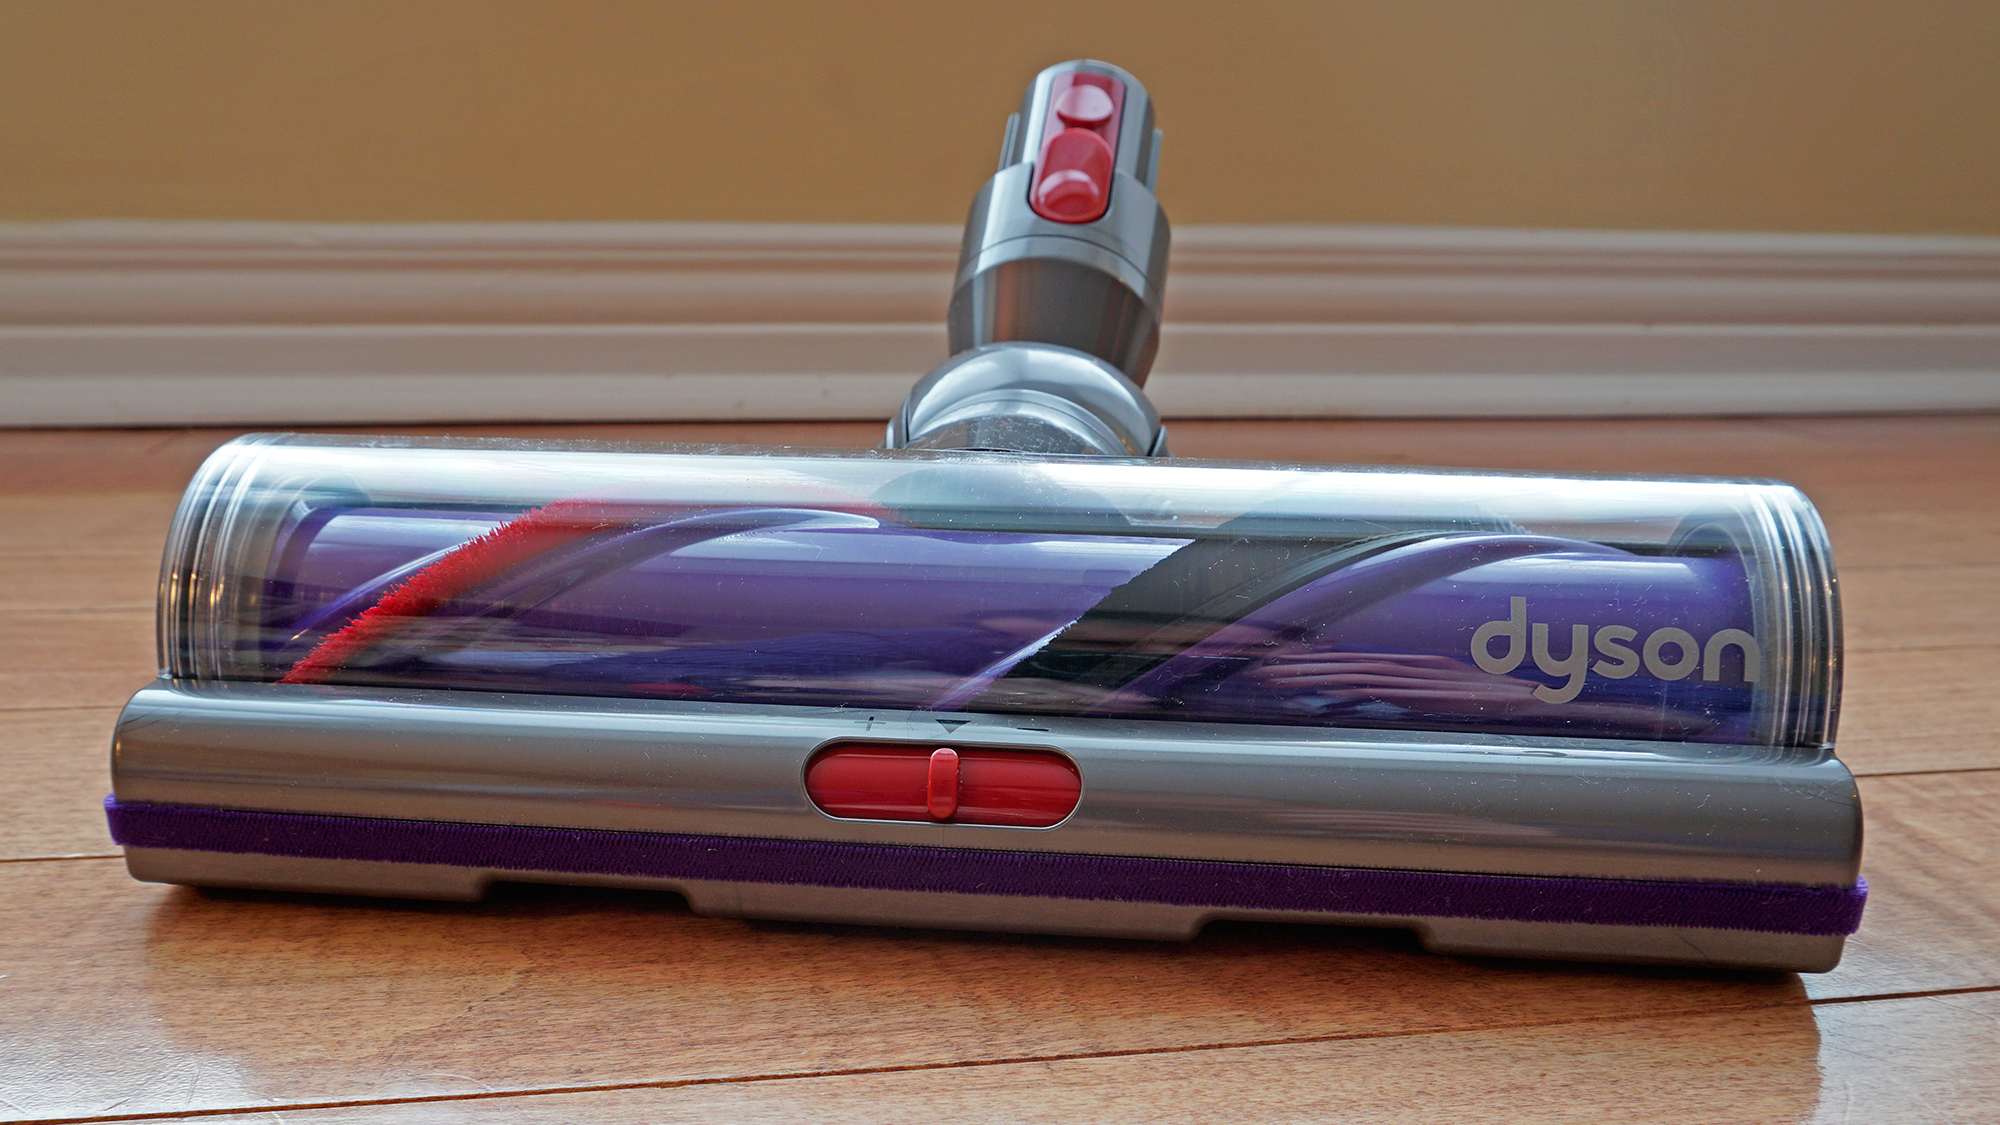 Dyson’s Pricey Cordless Vac Is So Good, It’s Killing Cords Altogether